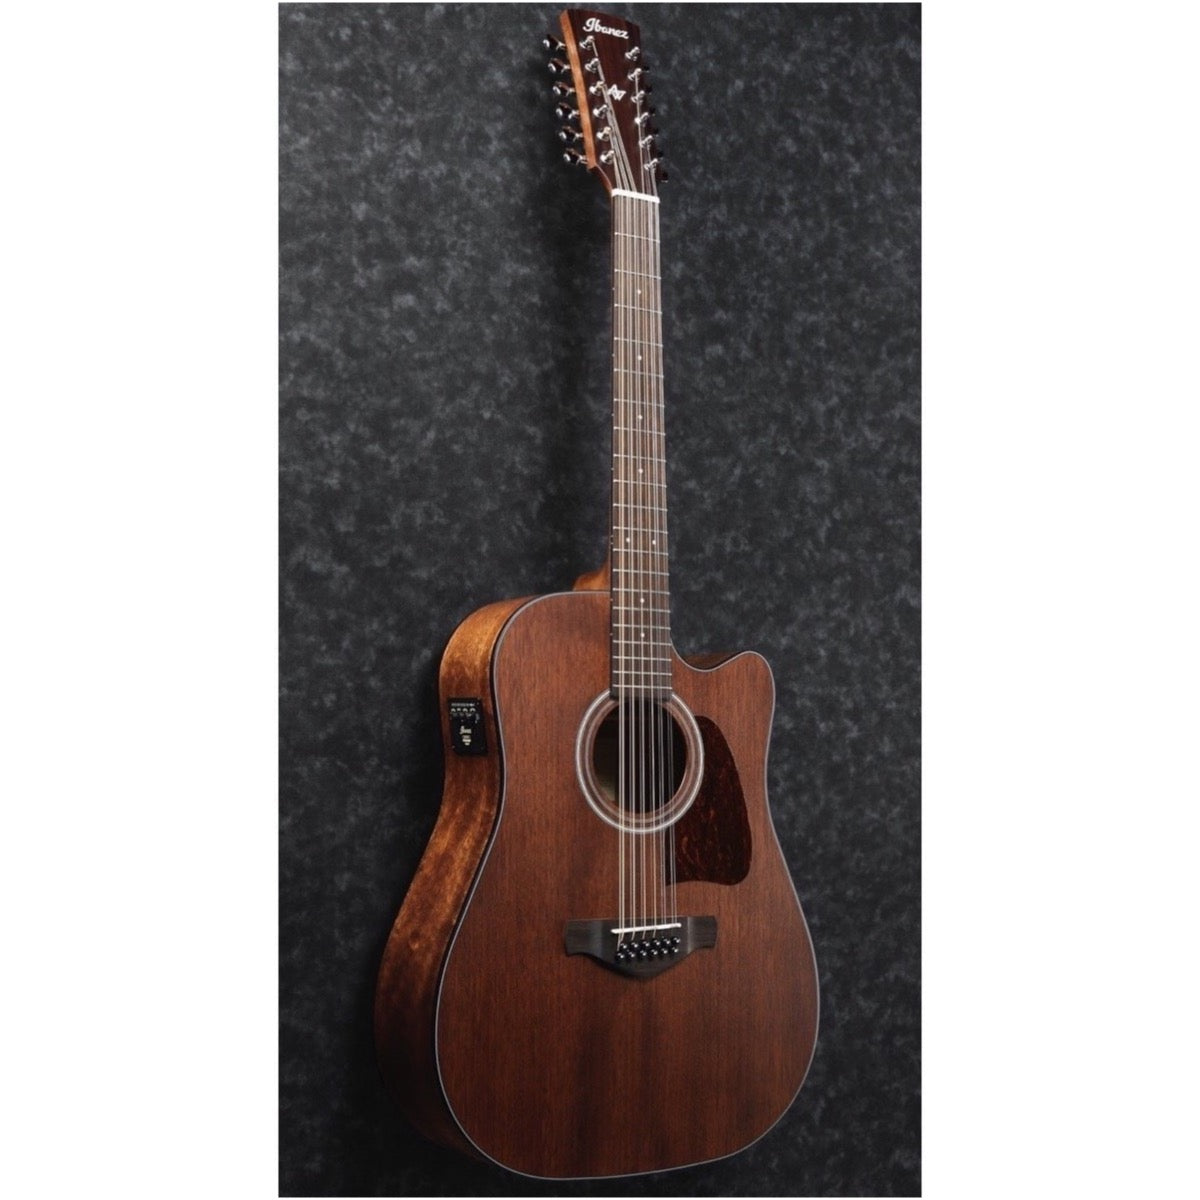 Ibanez Artwood AW5412 12-String Acoustic-Electric Guitar, Open Pore Natural